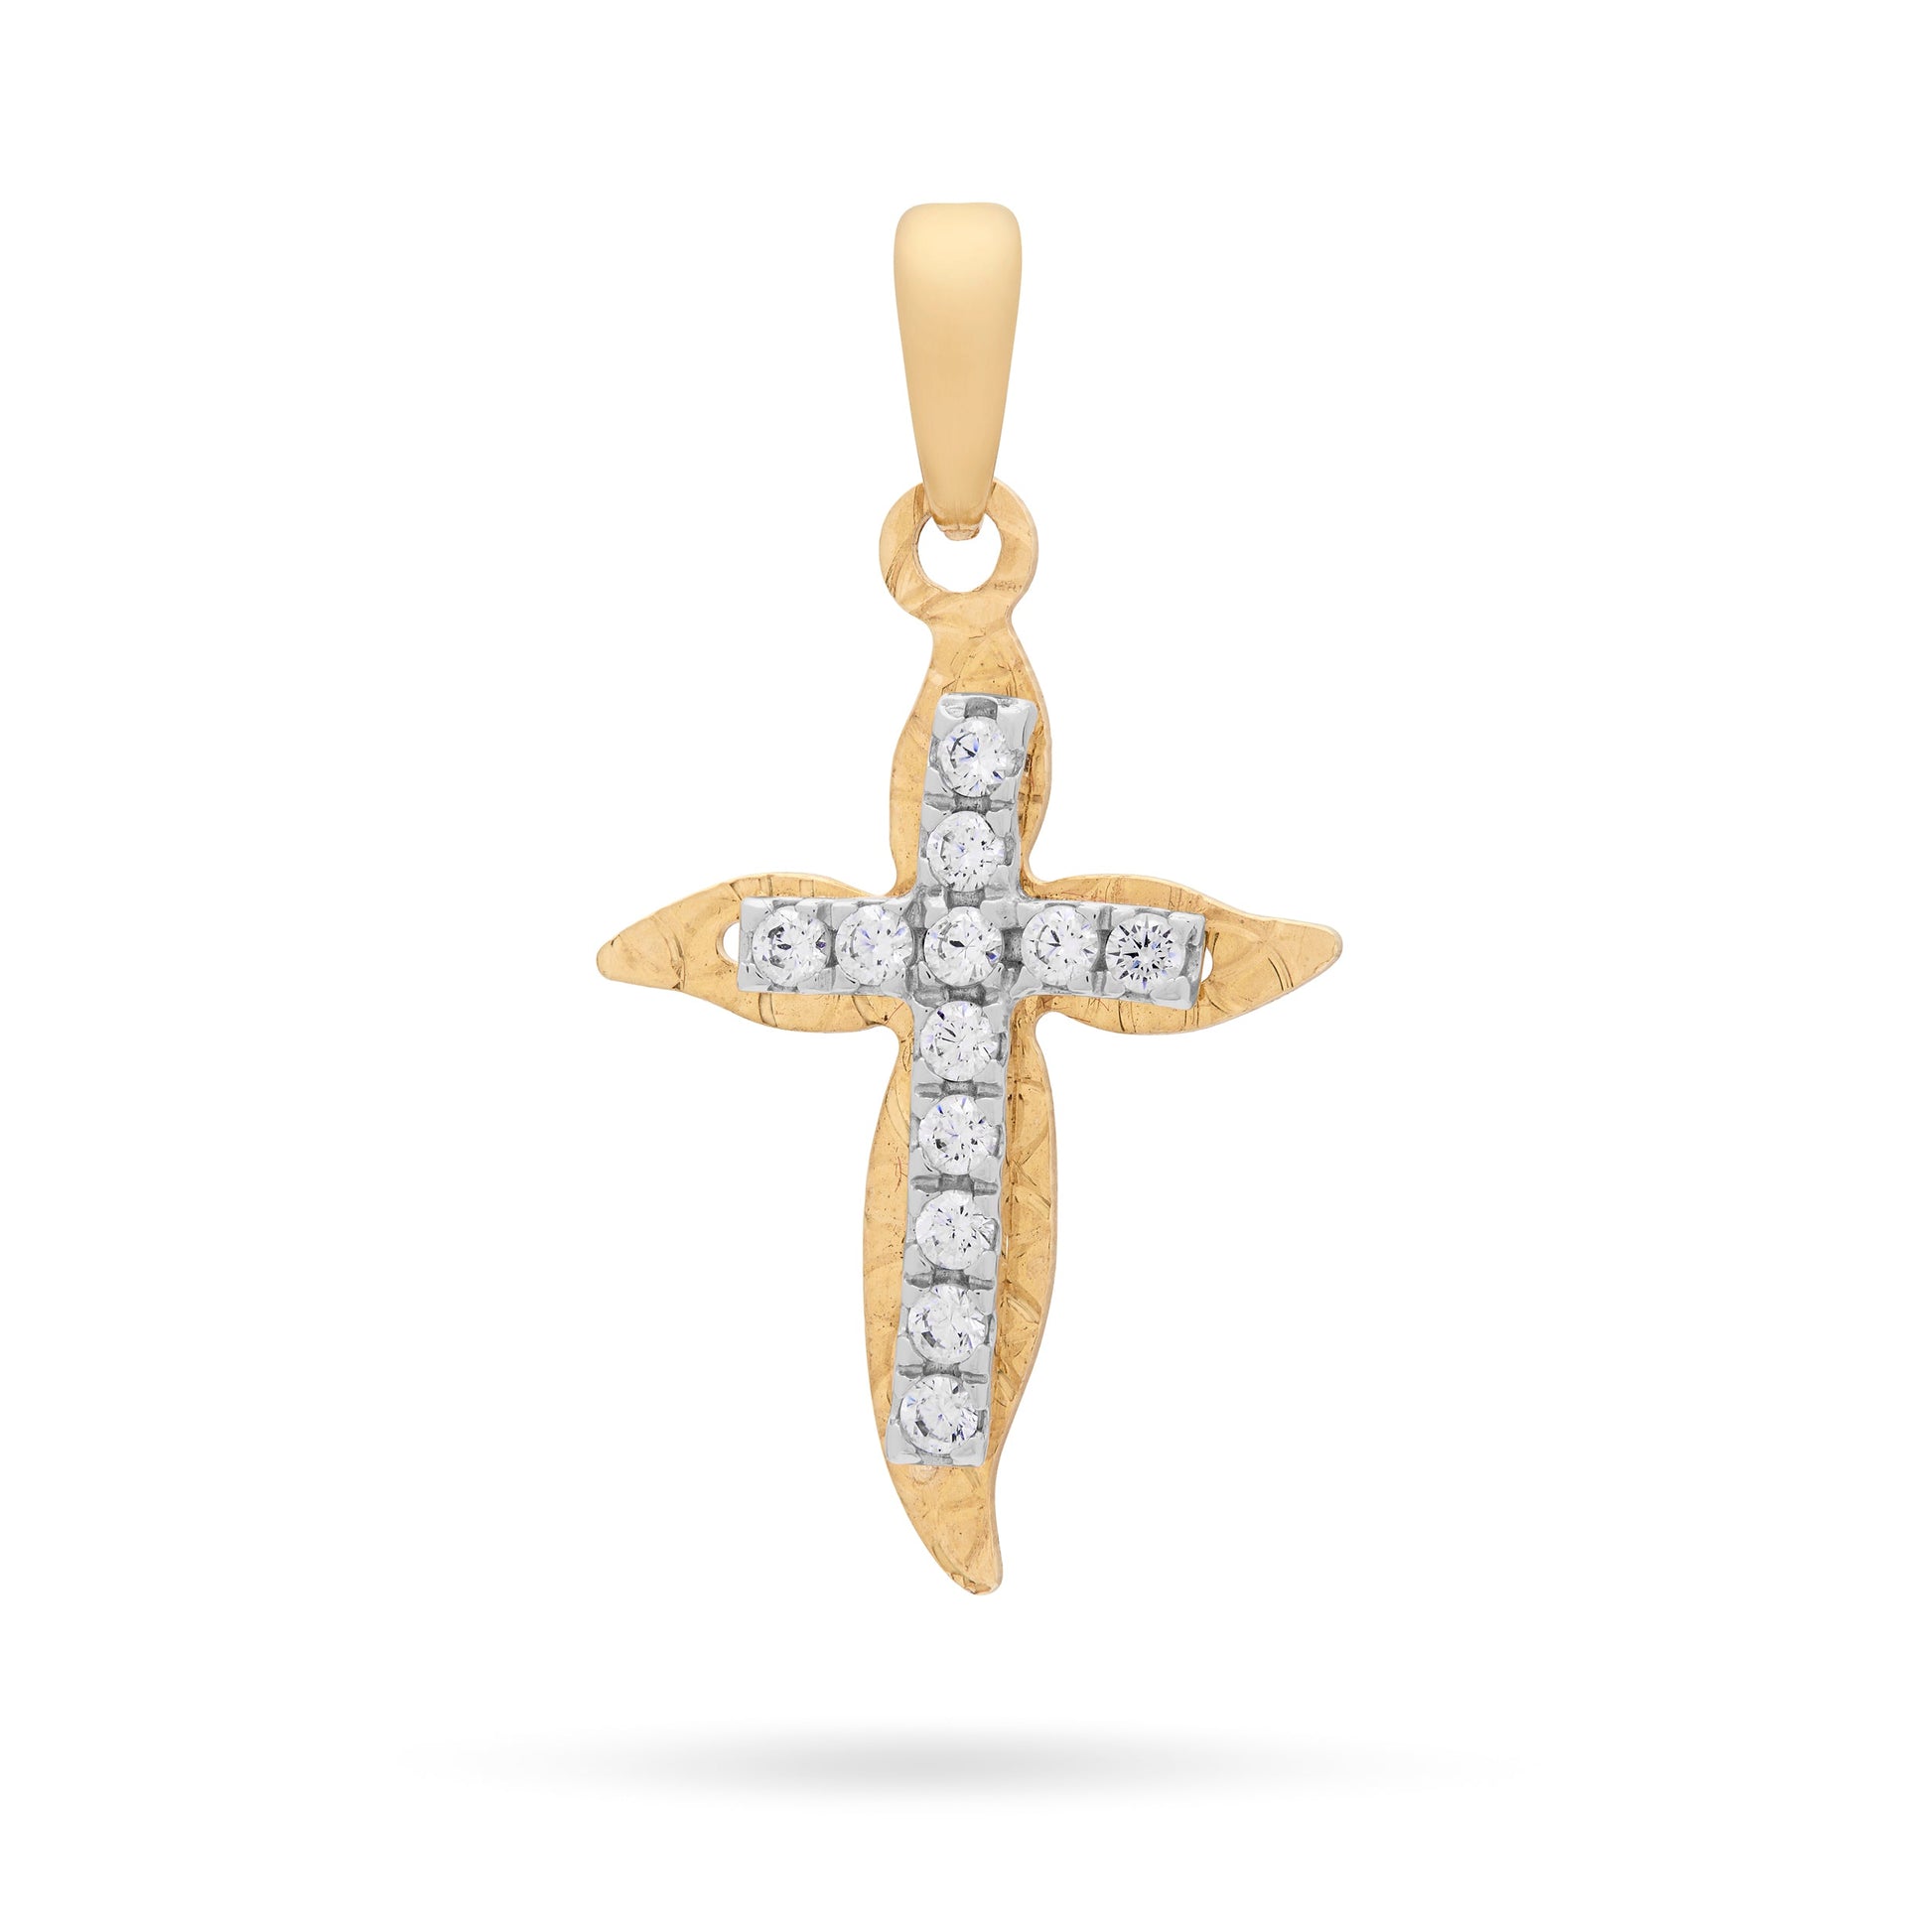 MONDO CATTOLICO Pendant 21 mm (0.83 in) Yellow Gold Cross Pendant With White Gold Center and Cubic Zirconia